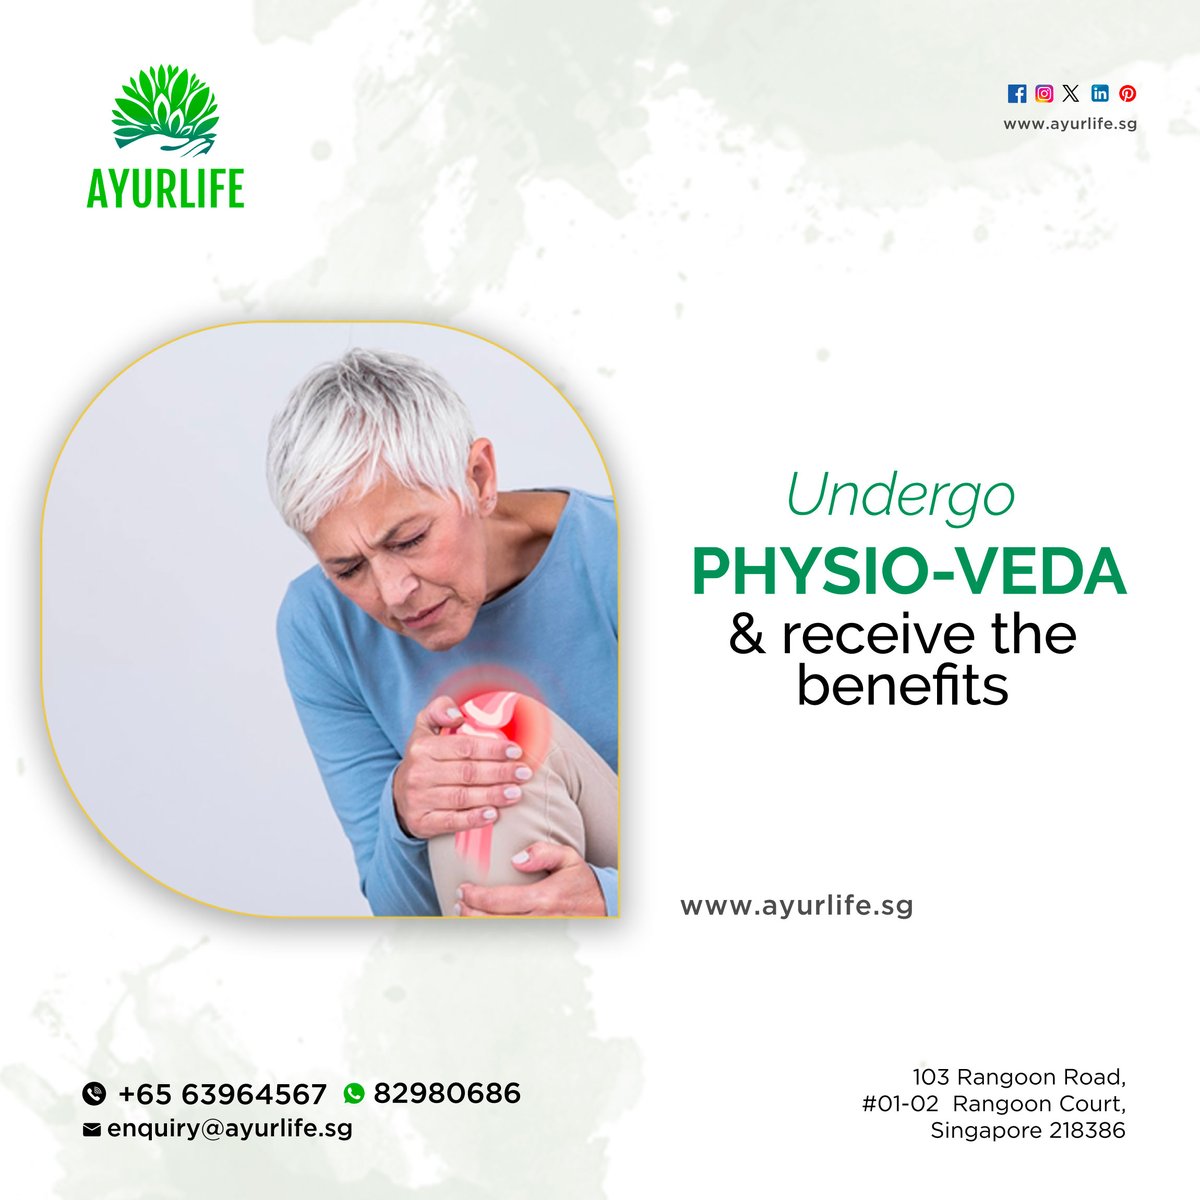 Contact Ayurlife today to schedule your Physio Veda Ayurvedic Therapy session and discover the life-changing benefits it can bring to your physical health and well-being.

✅ Frozen shoulder
✅ Ortho-related complaints
✅ sports injuries

#NaturalTherapies #BalanceAndFlexibility